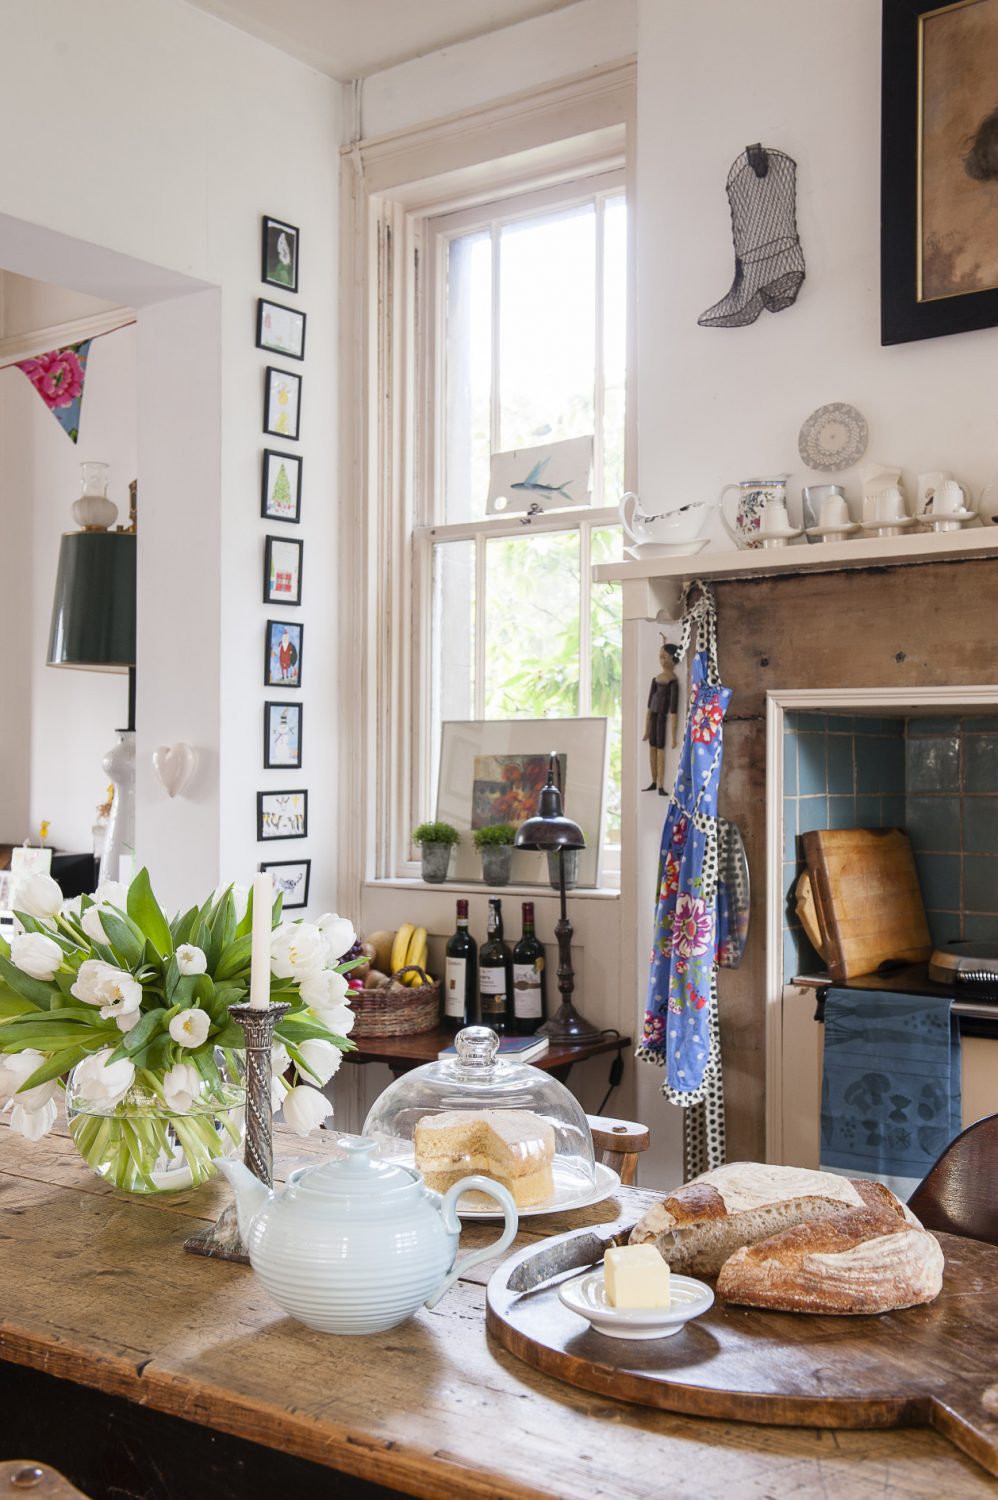 Freshly baked bread and cake make a welcoming sight on the kitchen table. Ceramics by Kate Schuricht, Sue Binns, Andre Wicks and Stuart Houghton line the mantelpiece